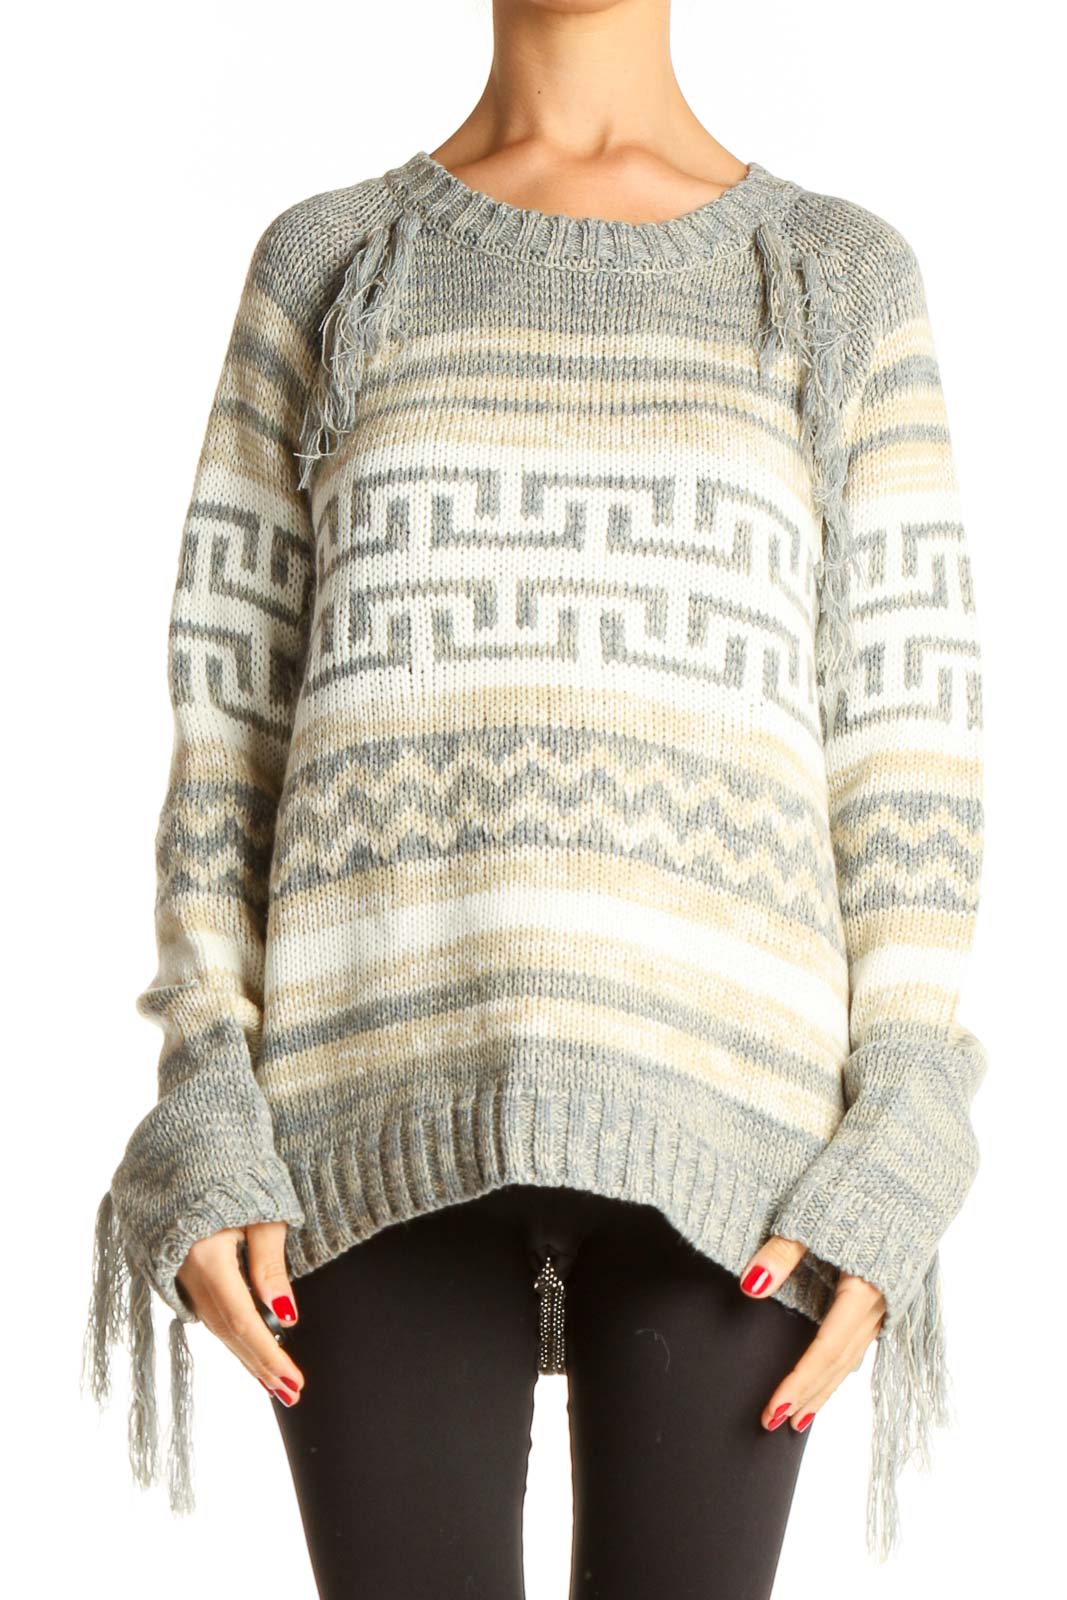 Gray Printed All Day Wear Sweater Front